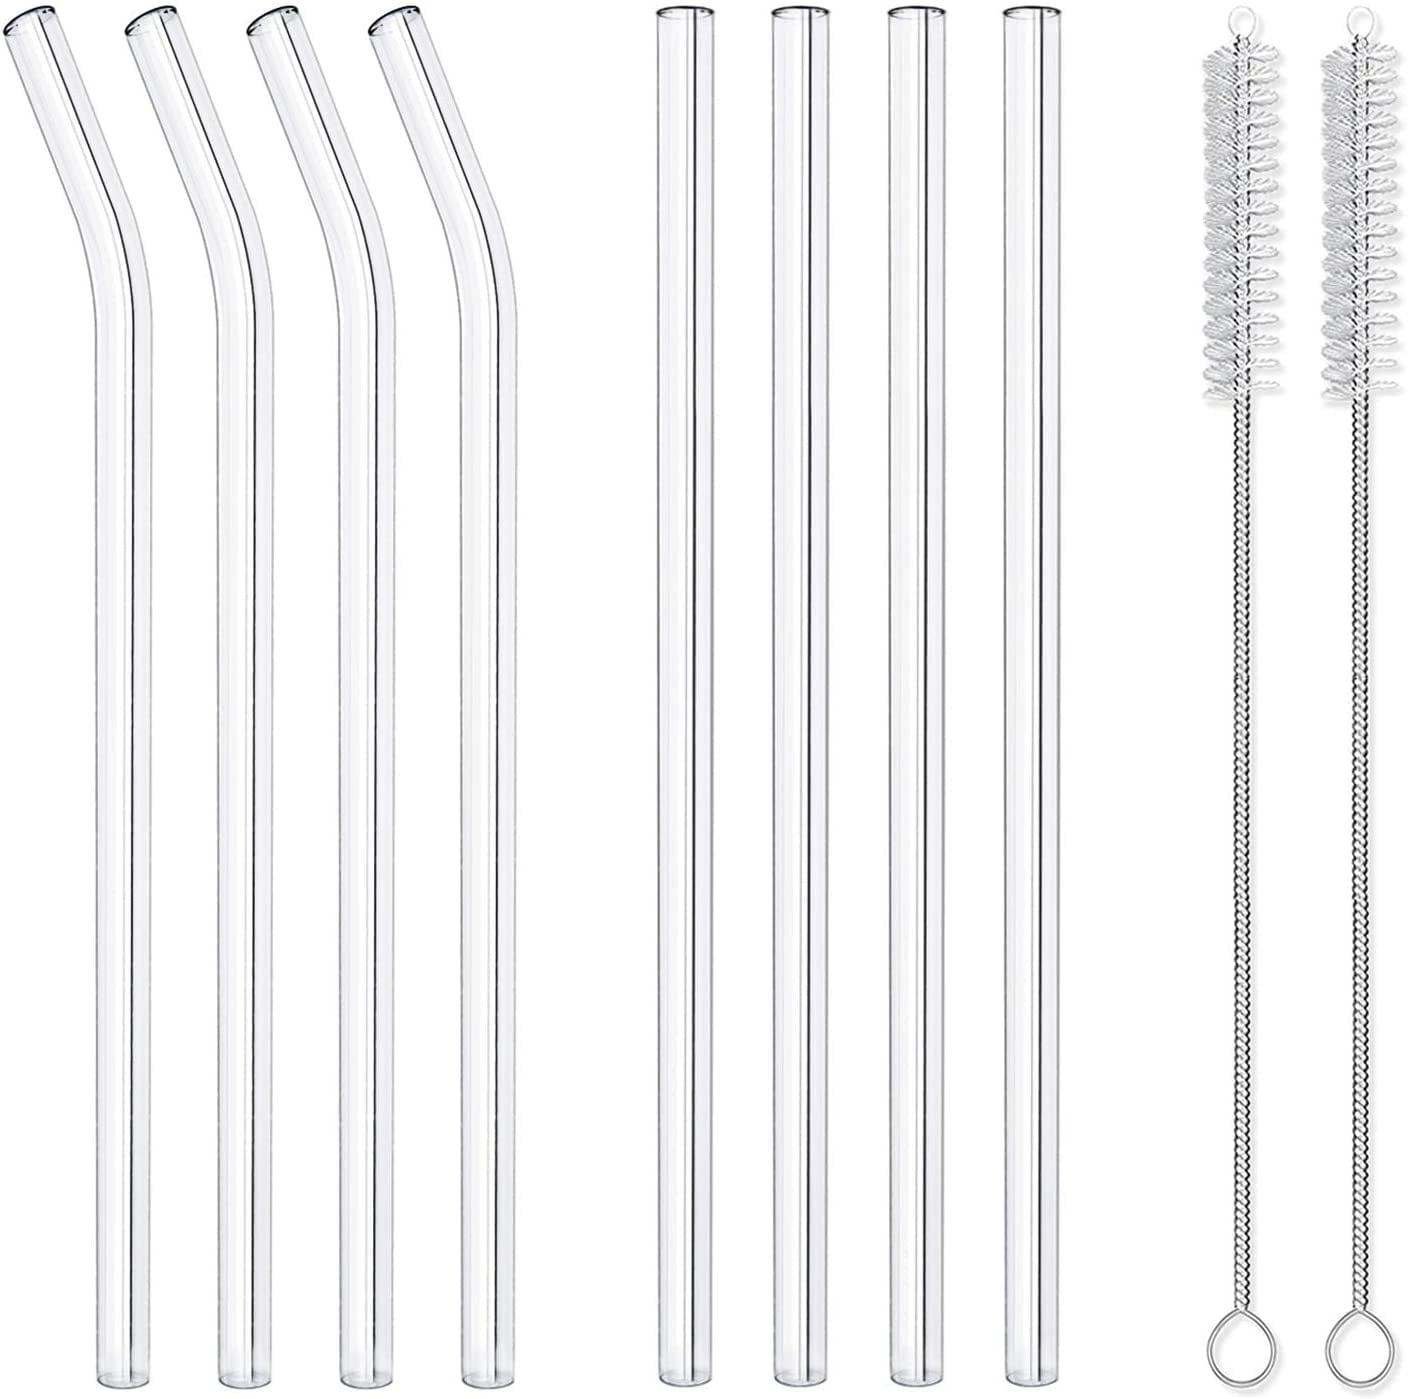 Bubbletea Milkshake 10 mm Glass straw for hot drinks or cold drinks Reiher straws Environmentally Friendly Frozen drinks Pack of 8 with 2 Cleaning Brush Smoothie Reusable straws 